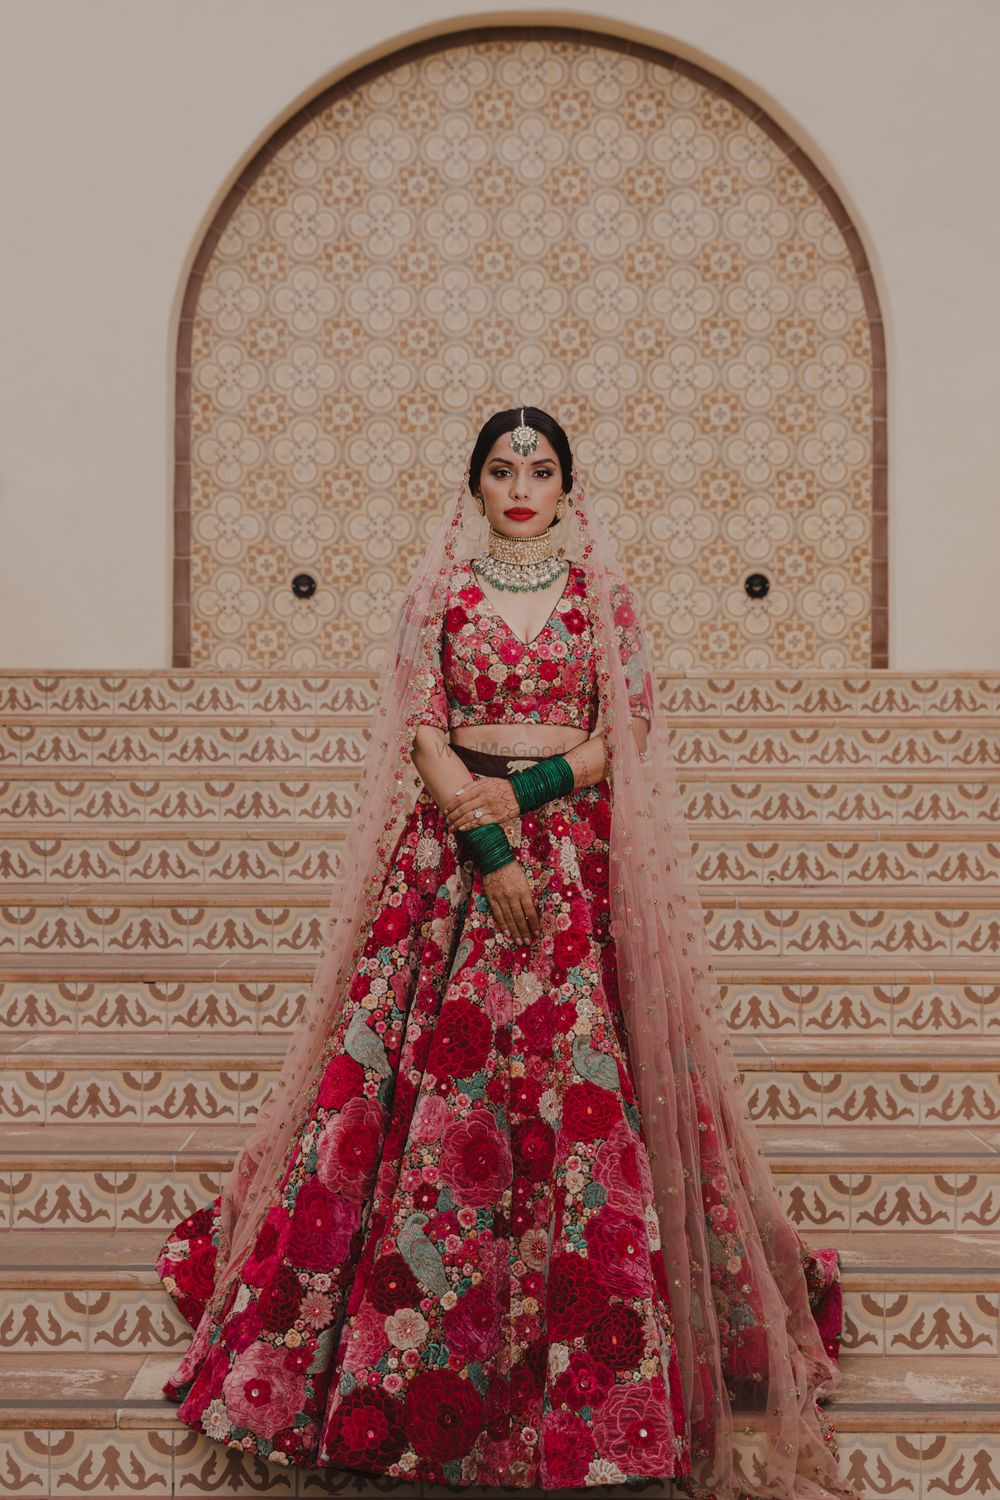 Photo of A bride in gorgeous floral lehenga